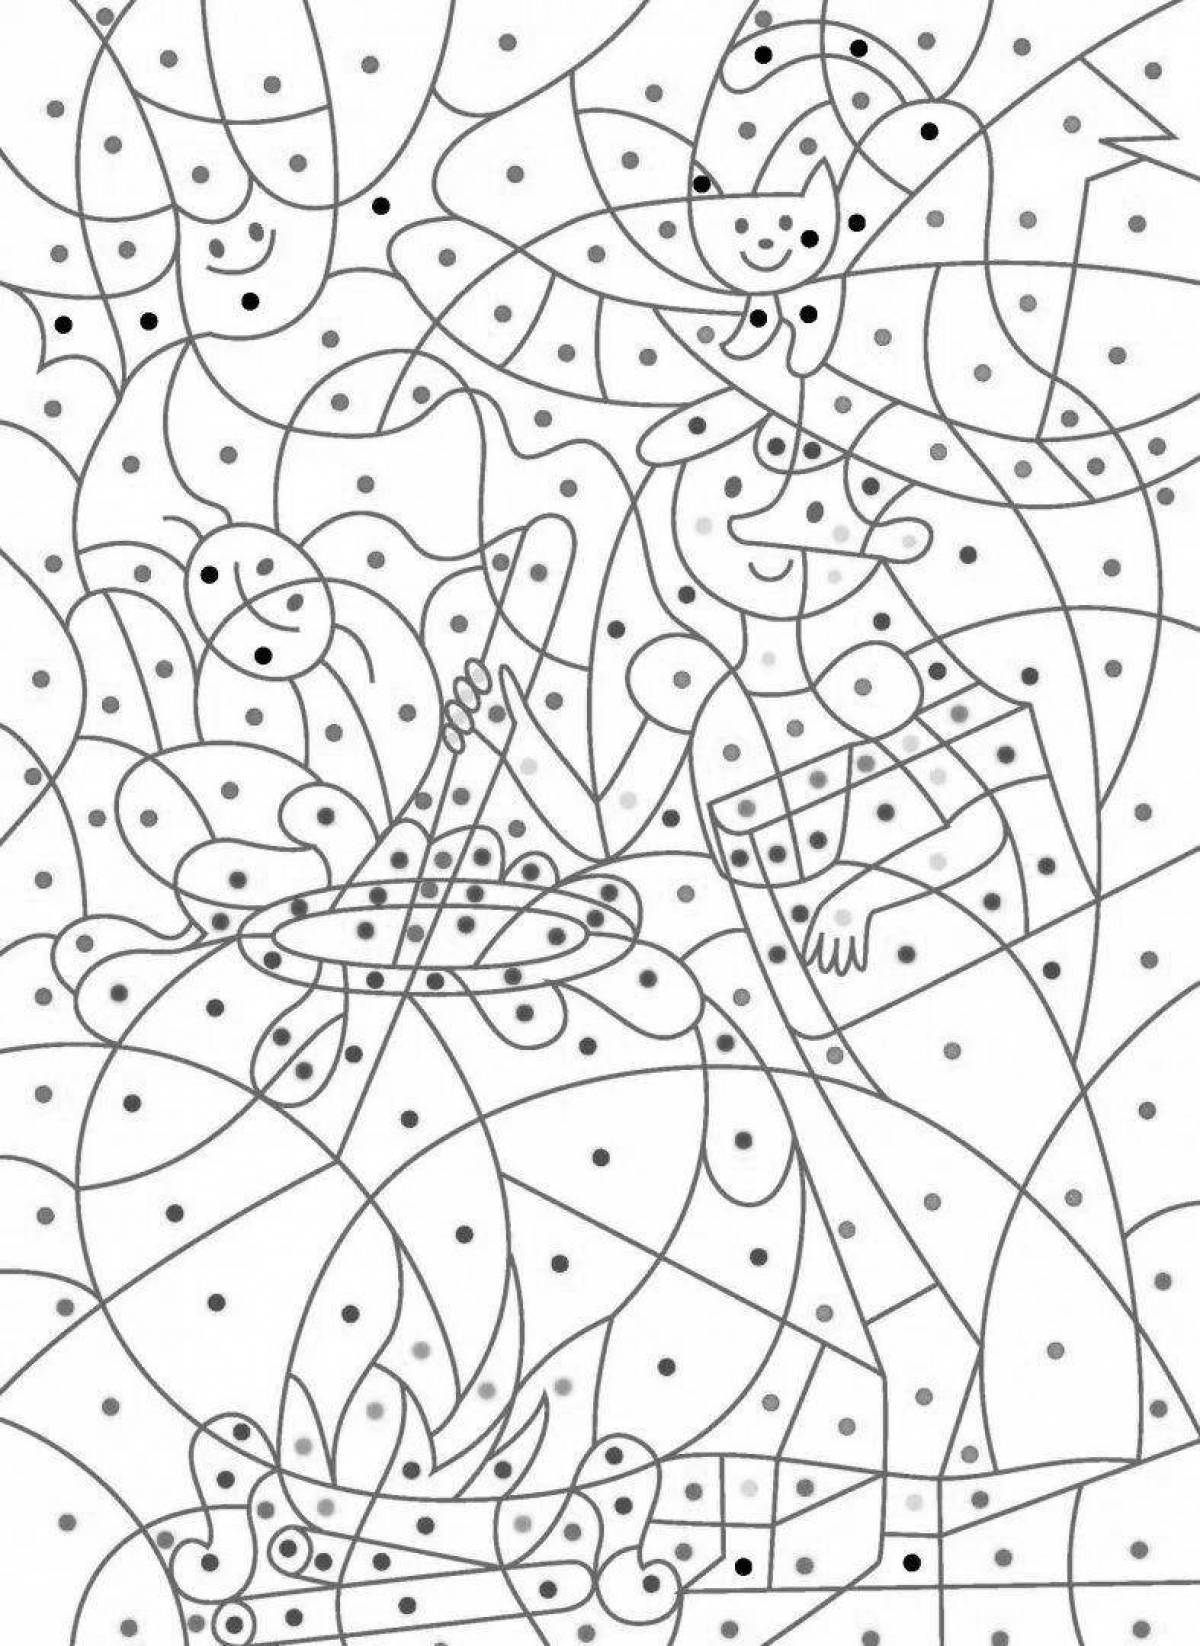 Deluxe coloring by color-dotted dots